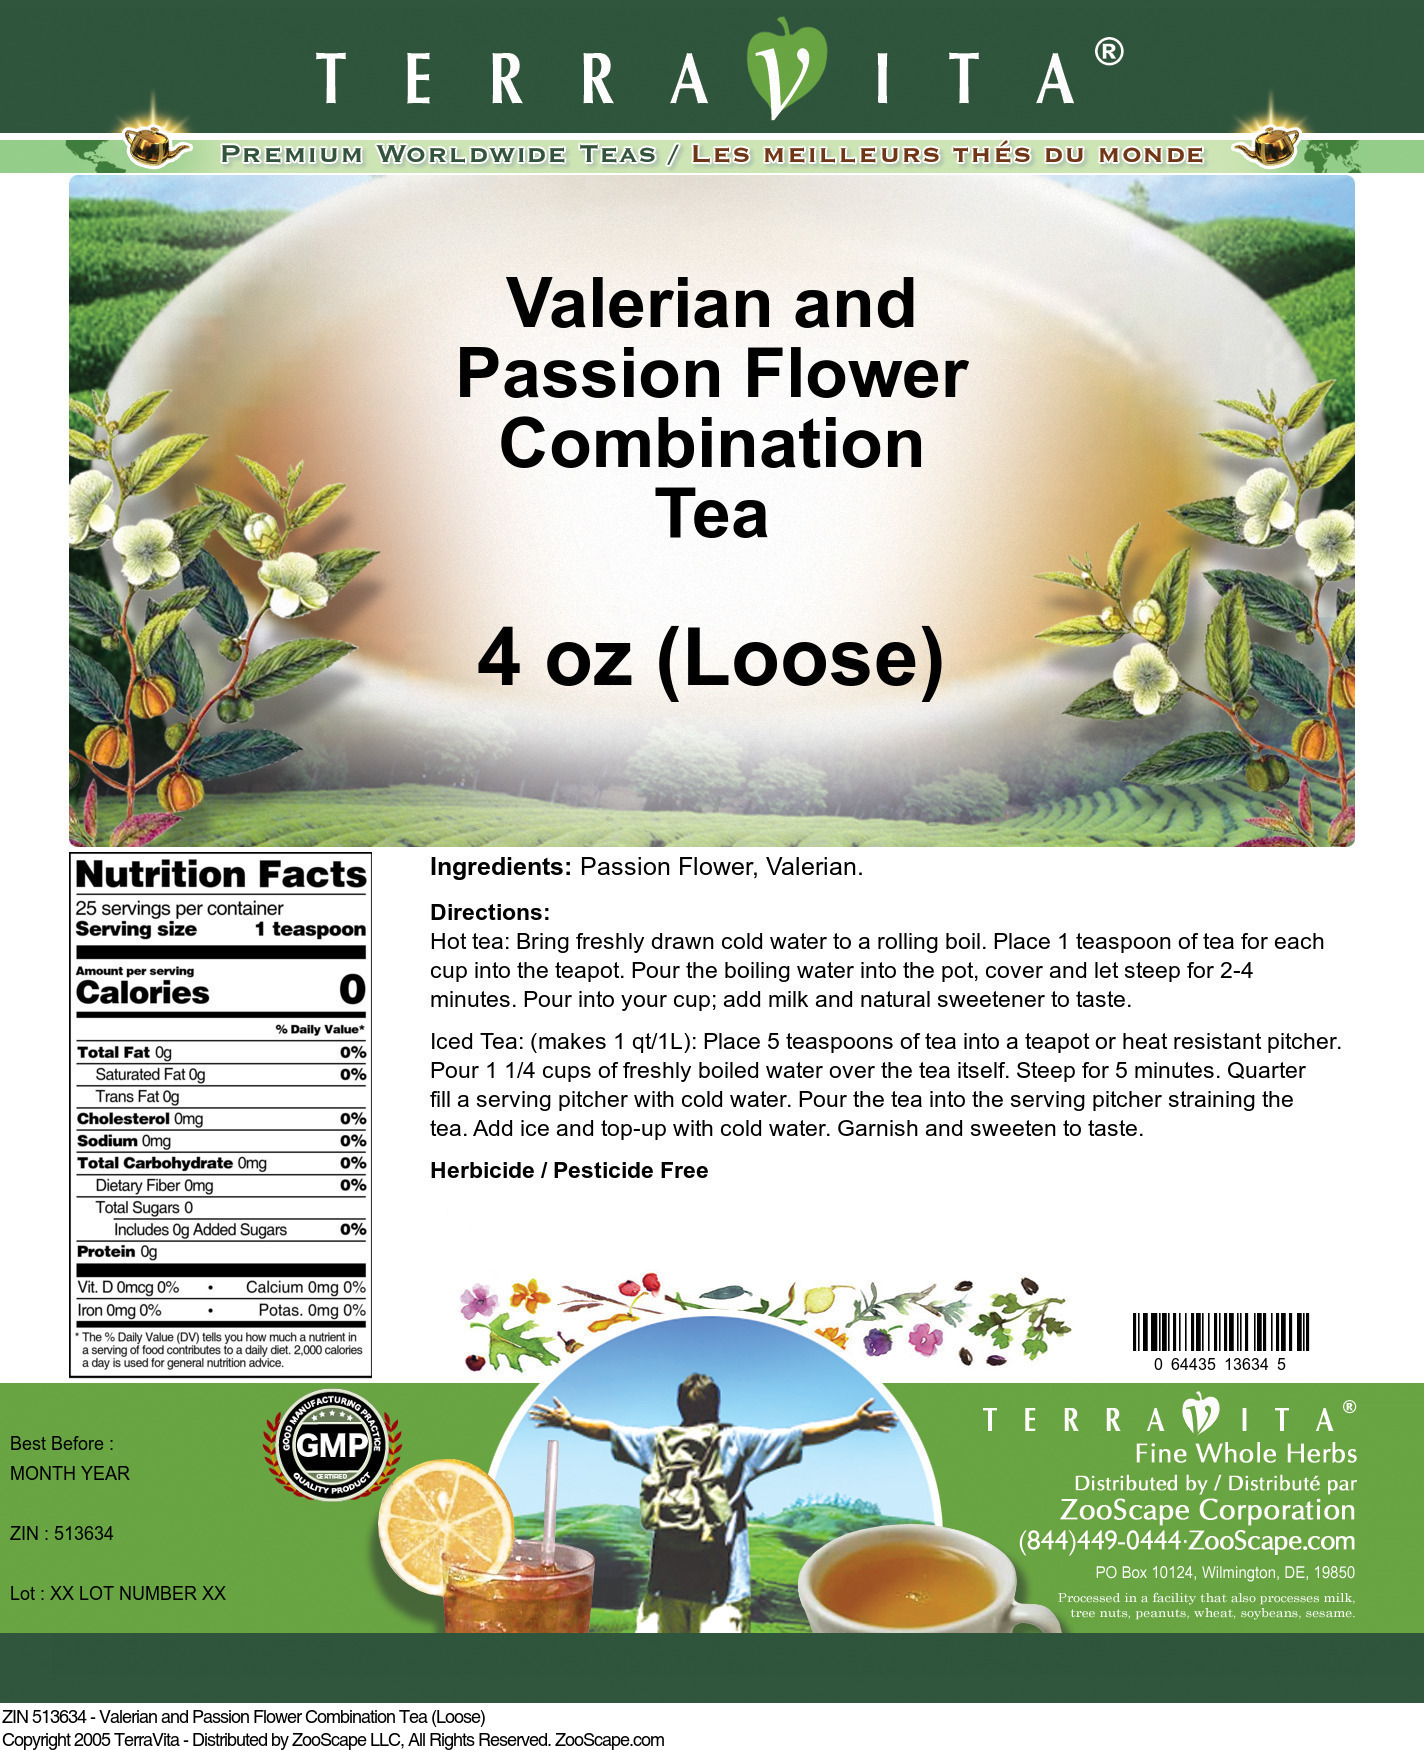 Valerian and Passion Flower Combination Tea (Loose) - Label